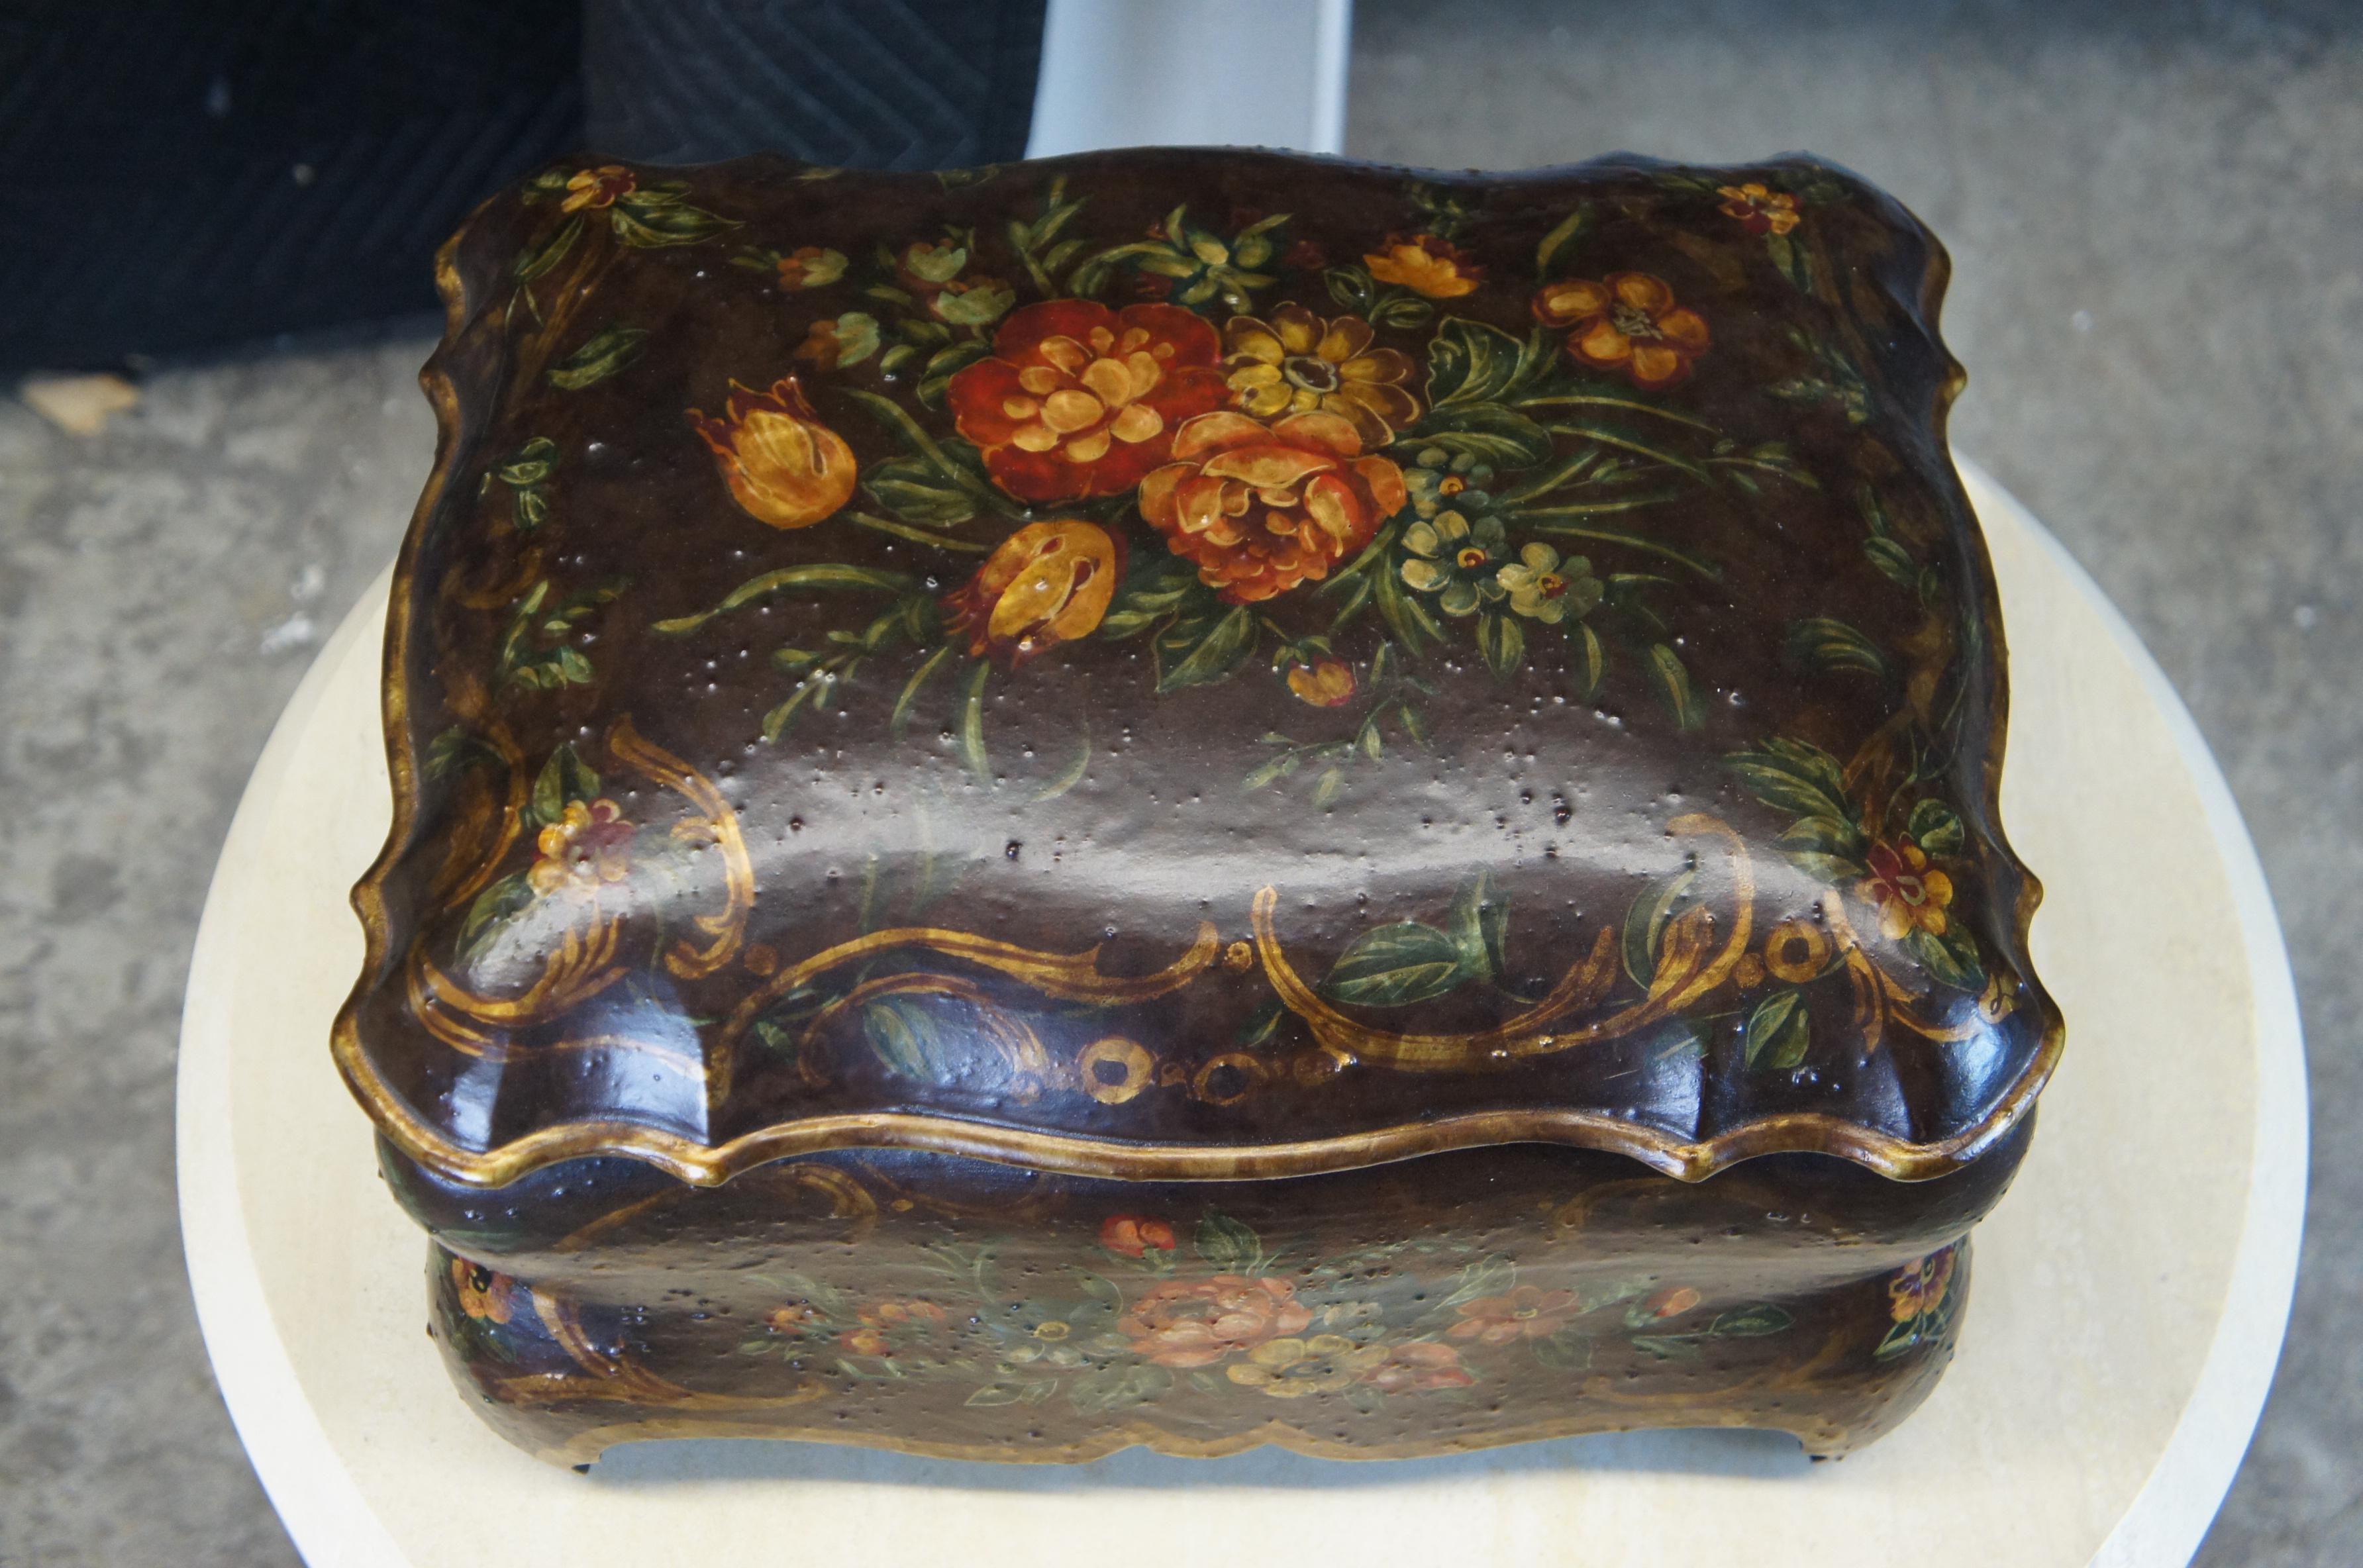 20th Century Baroque Revival Hand Painted Bombe Decorative Box Jewelry Chest Centerpiece For Sale